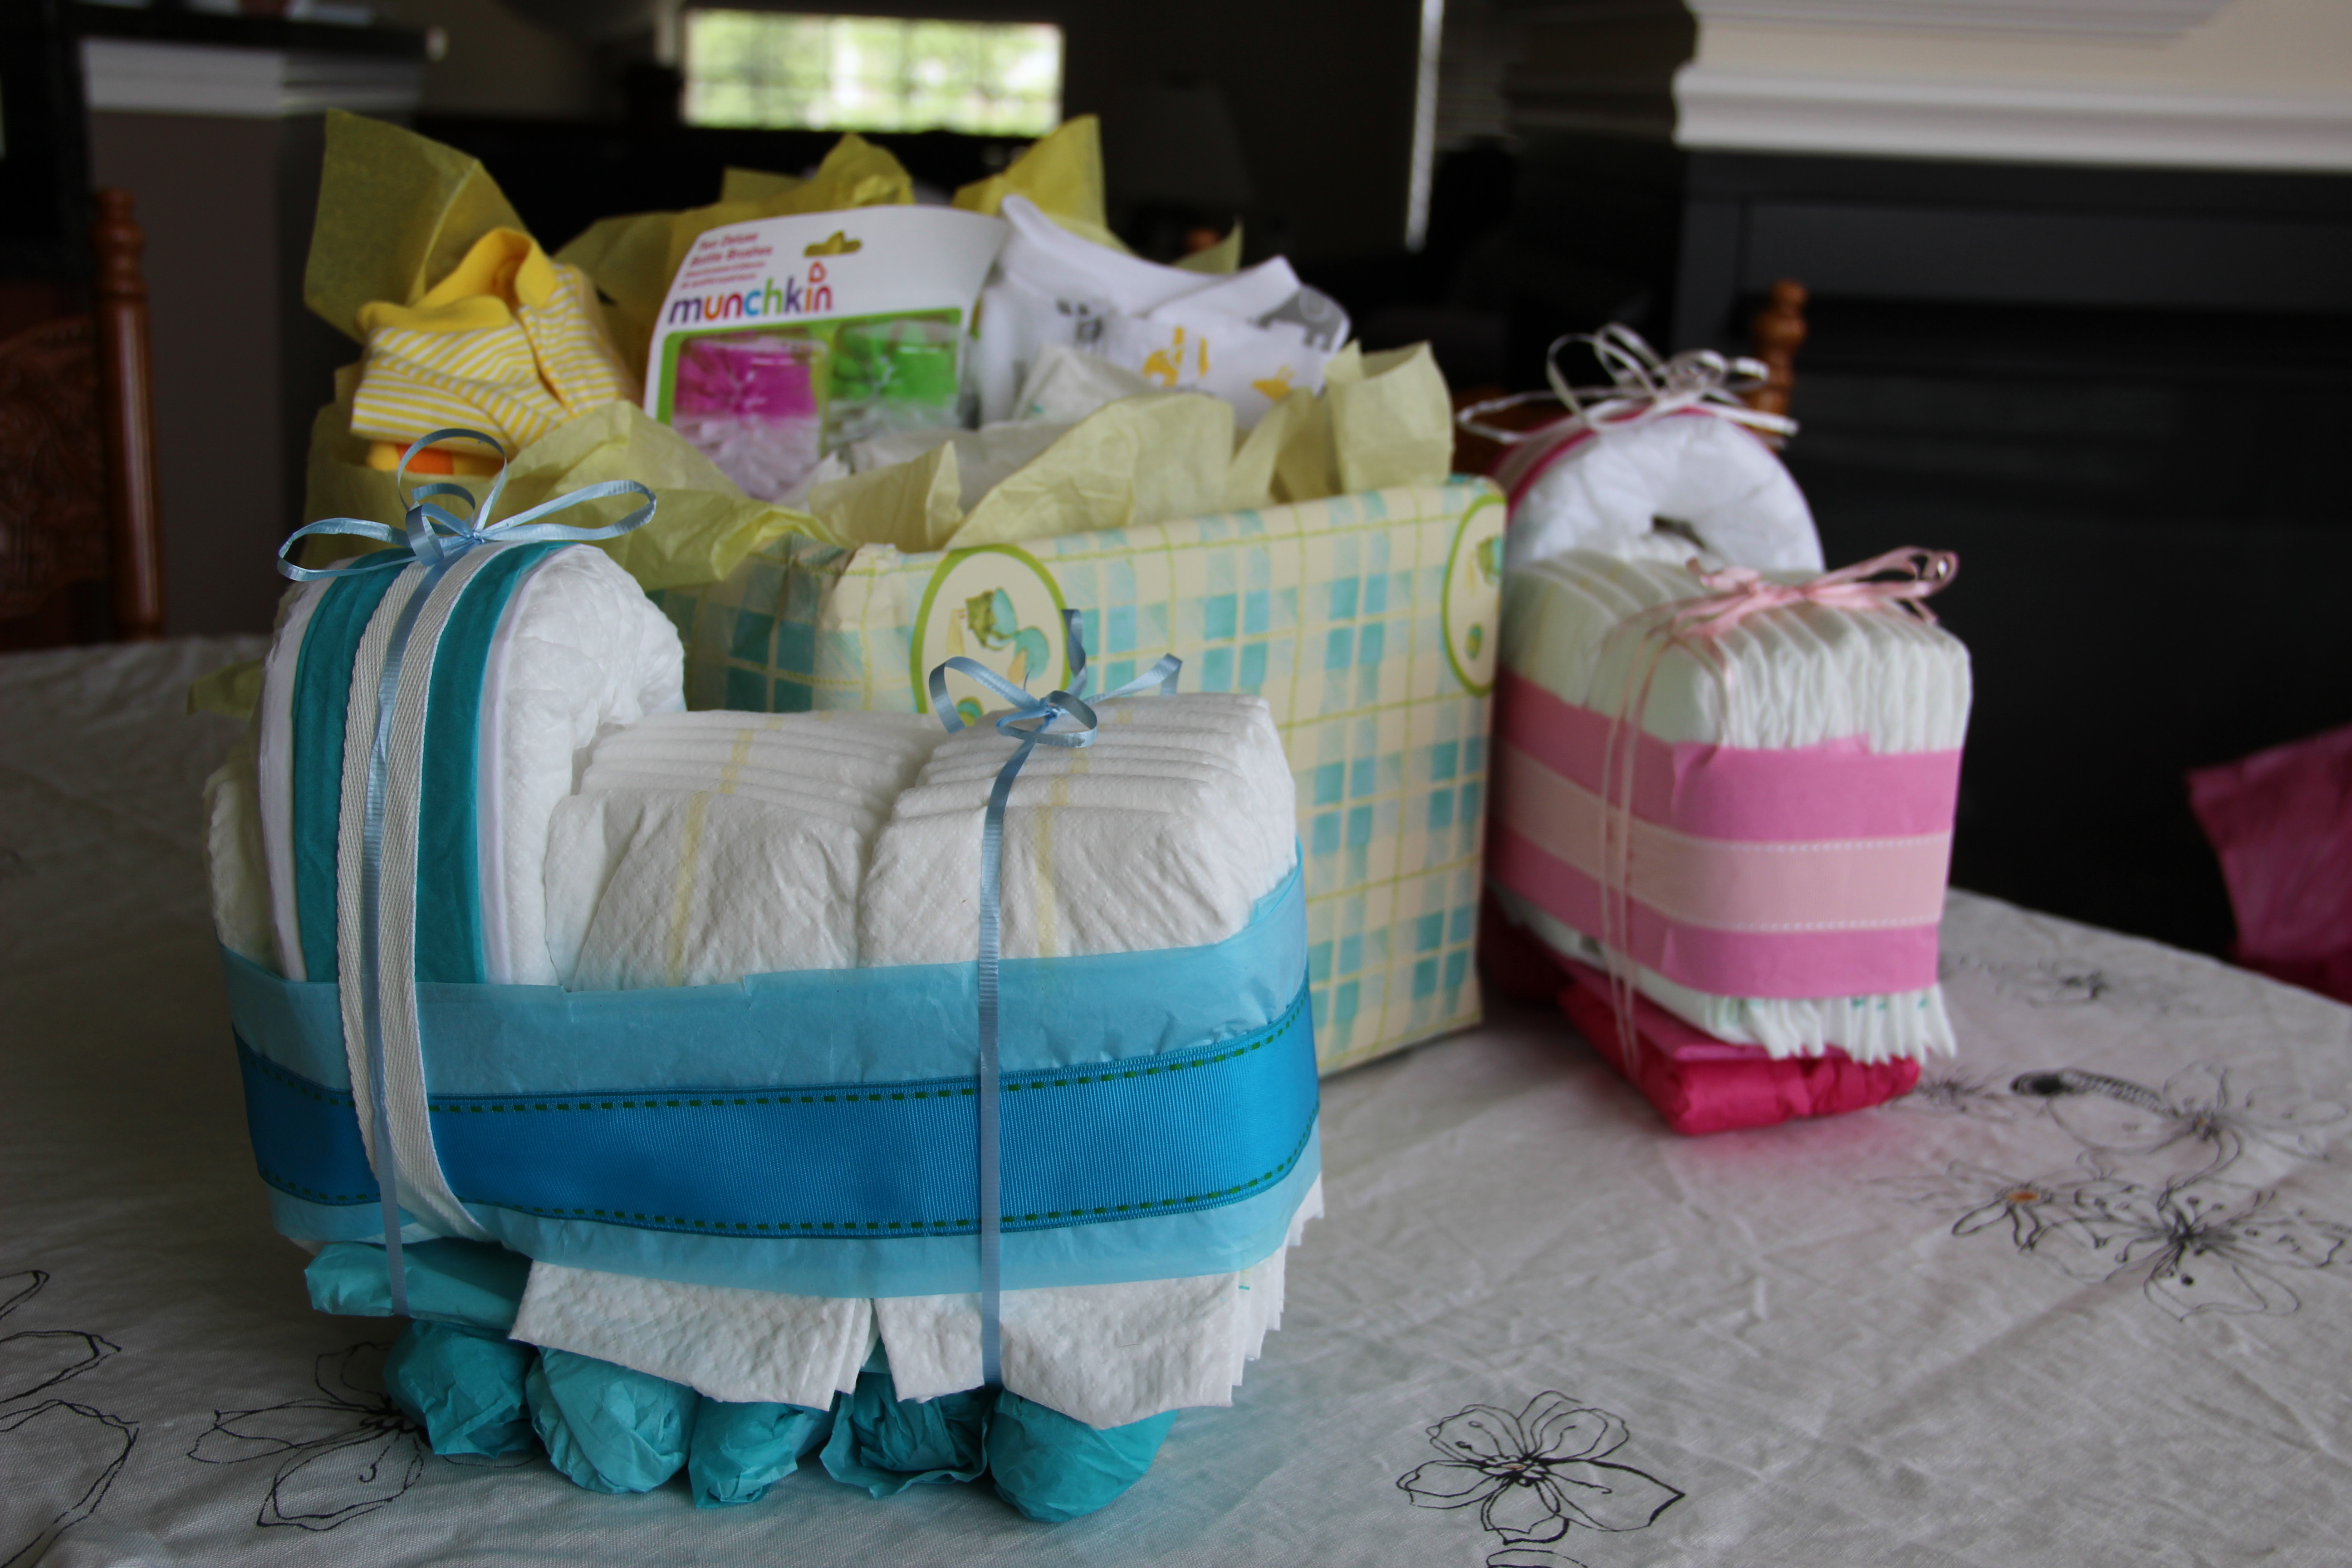 Babyshower Gift Ideas
 The Importance of Being Cleveland